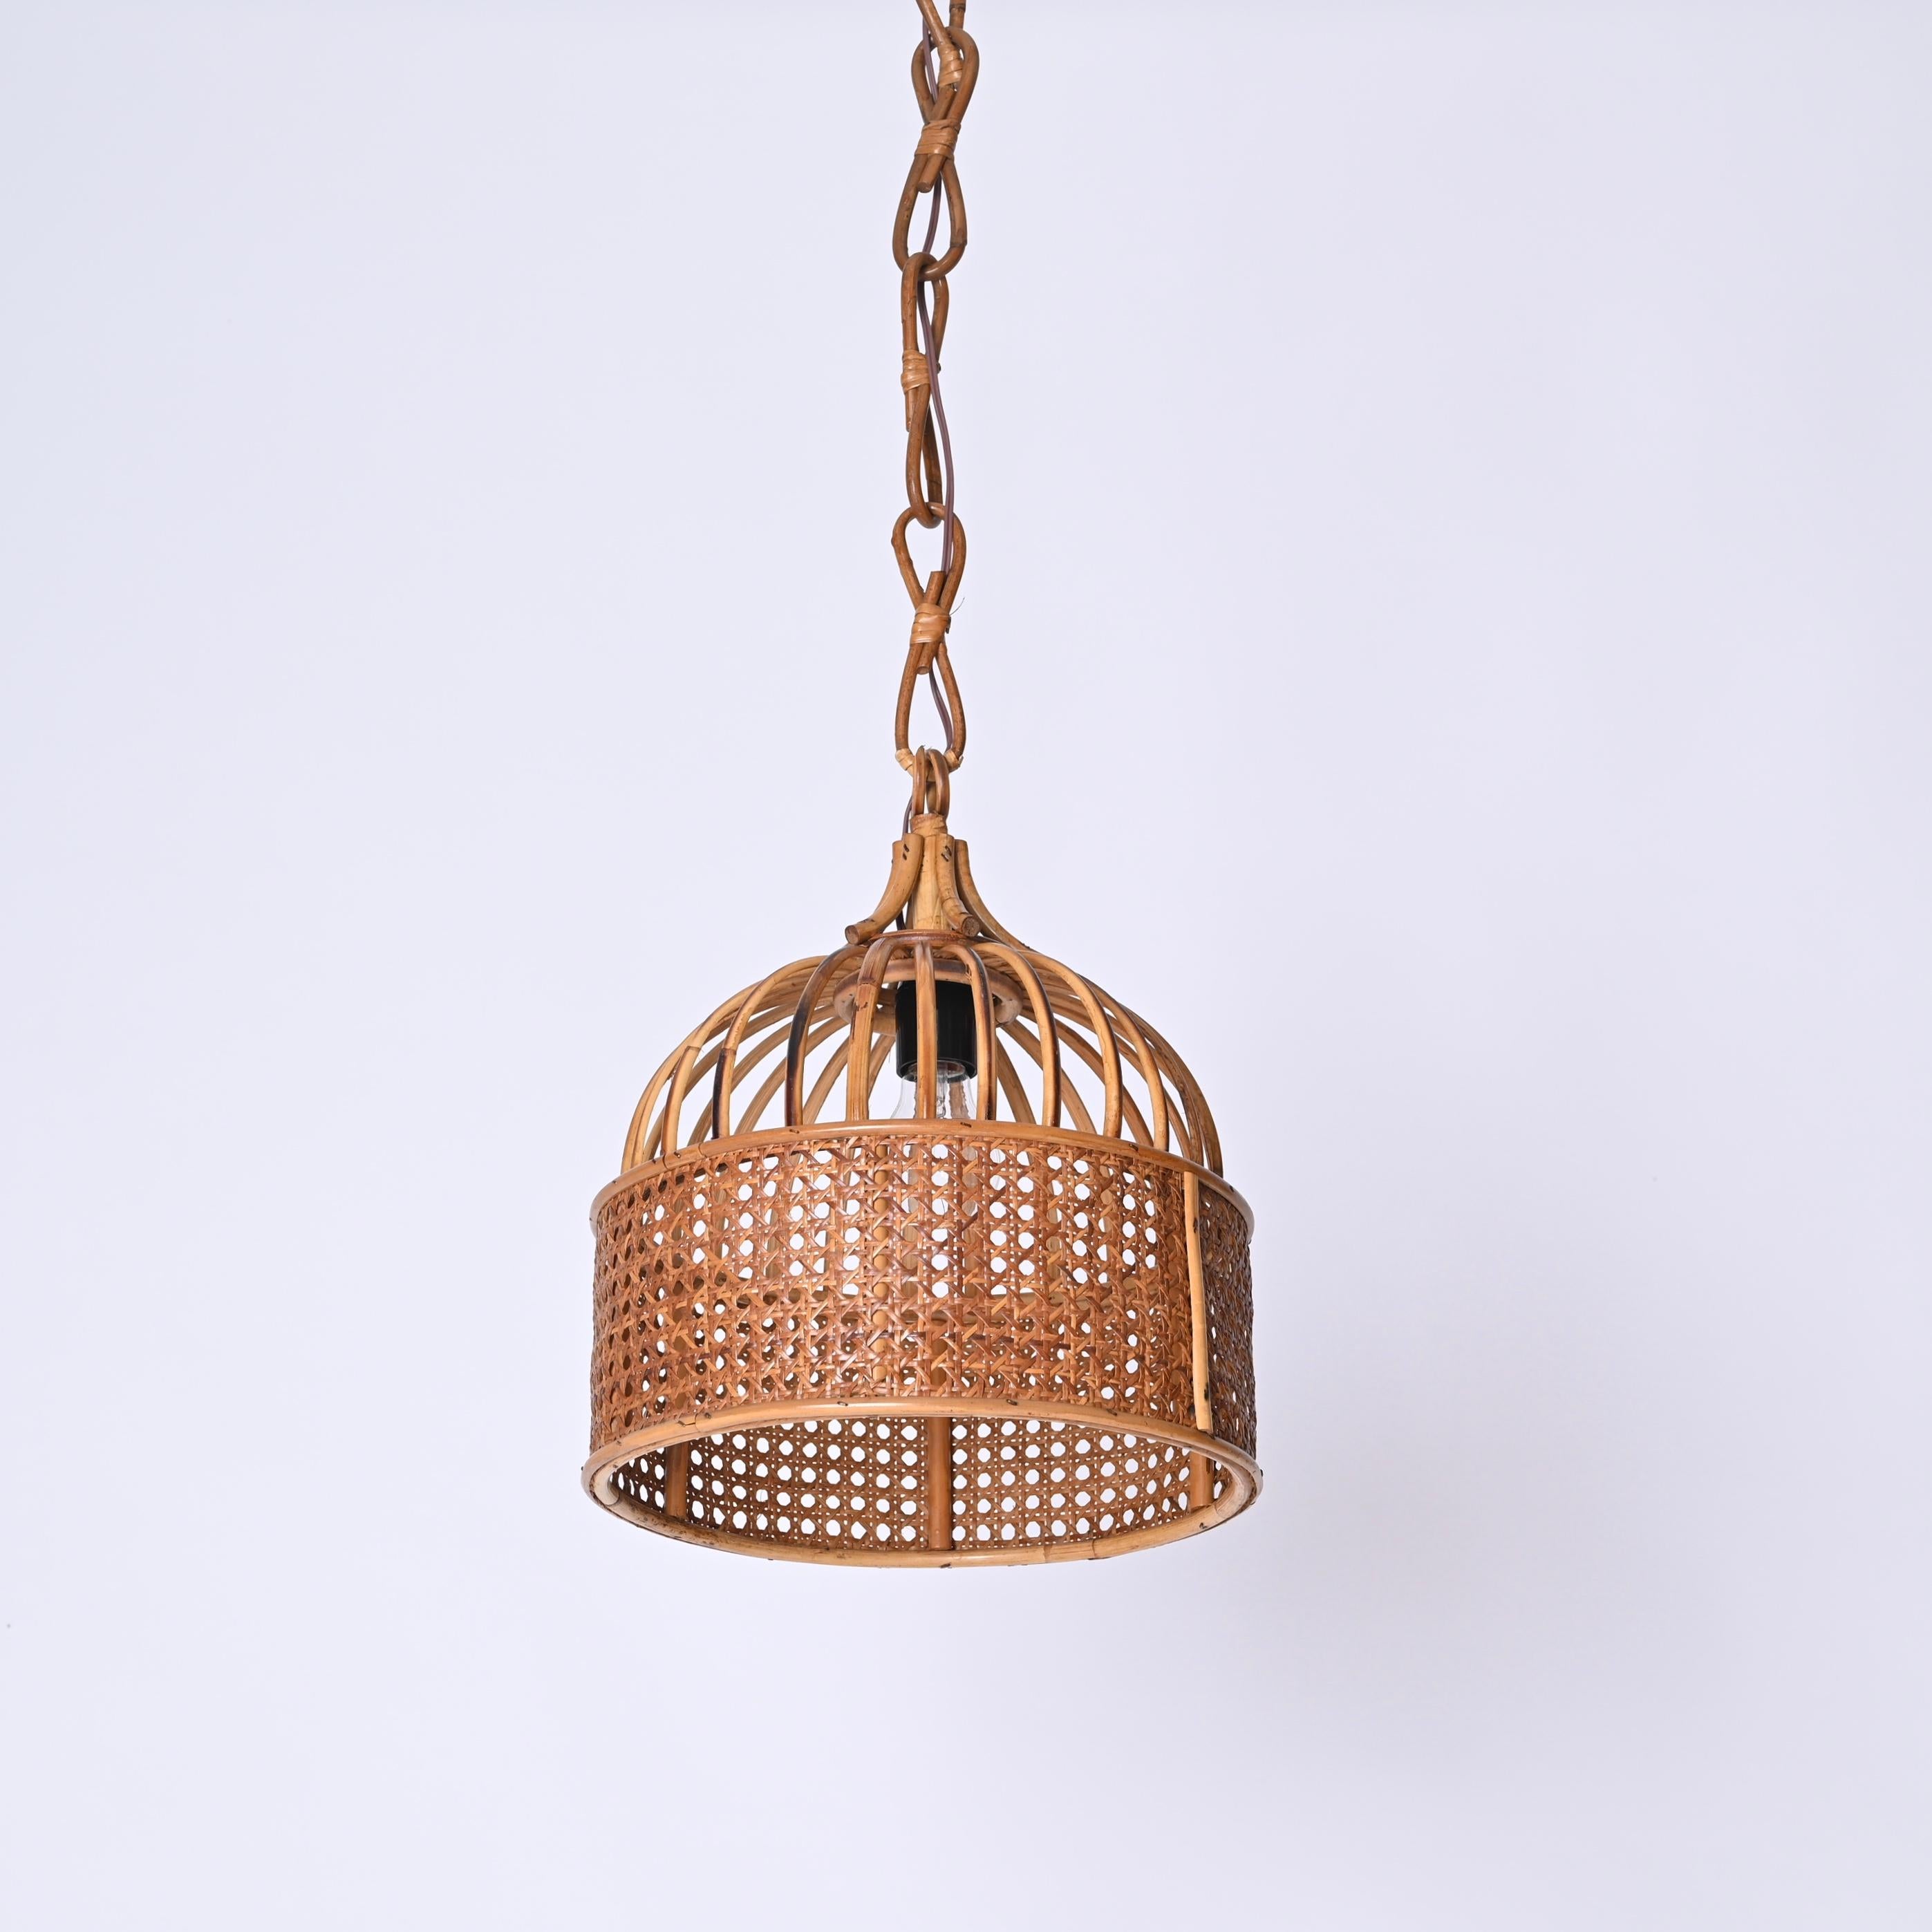 Bamboo Midcentury French Riviera Round Pendant in Rattan and Wicker, Italy 1970s For Sale